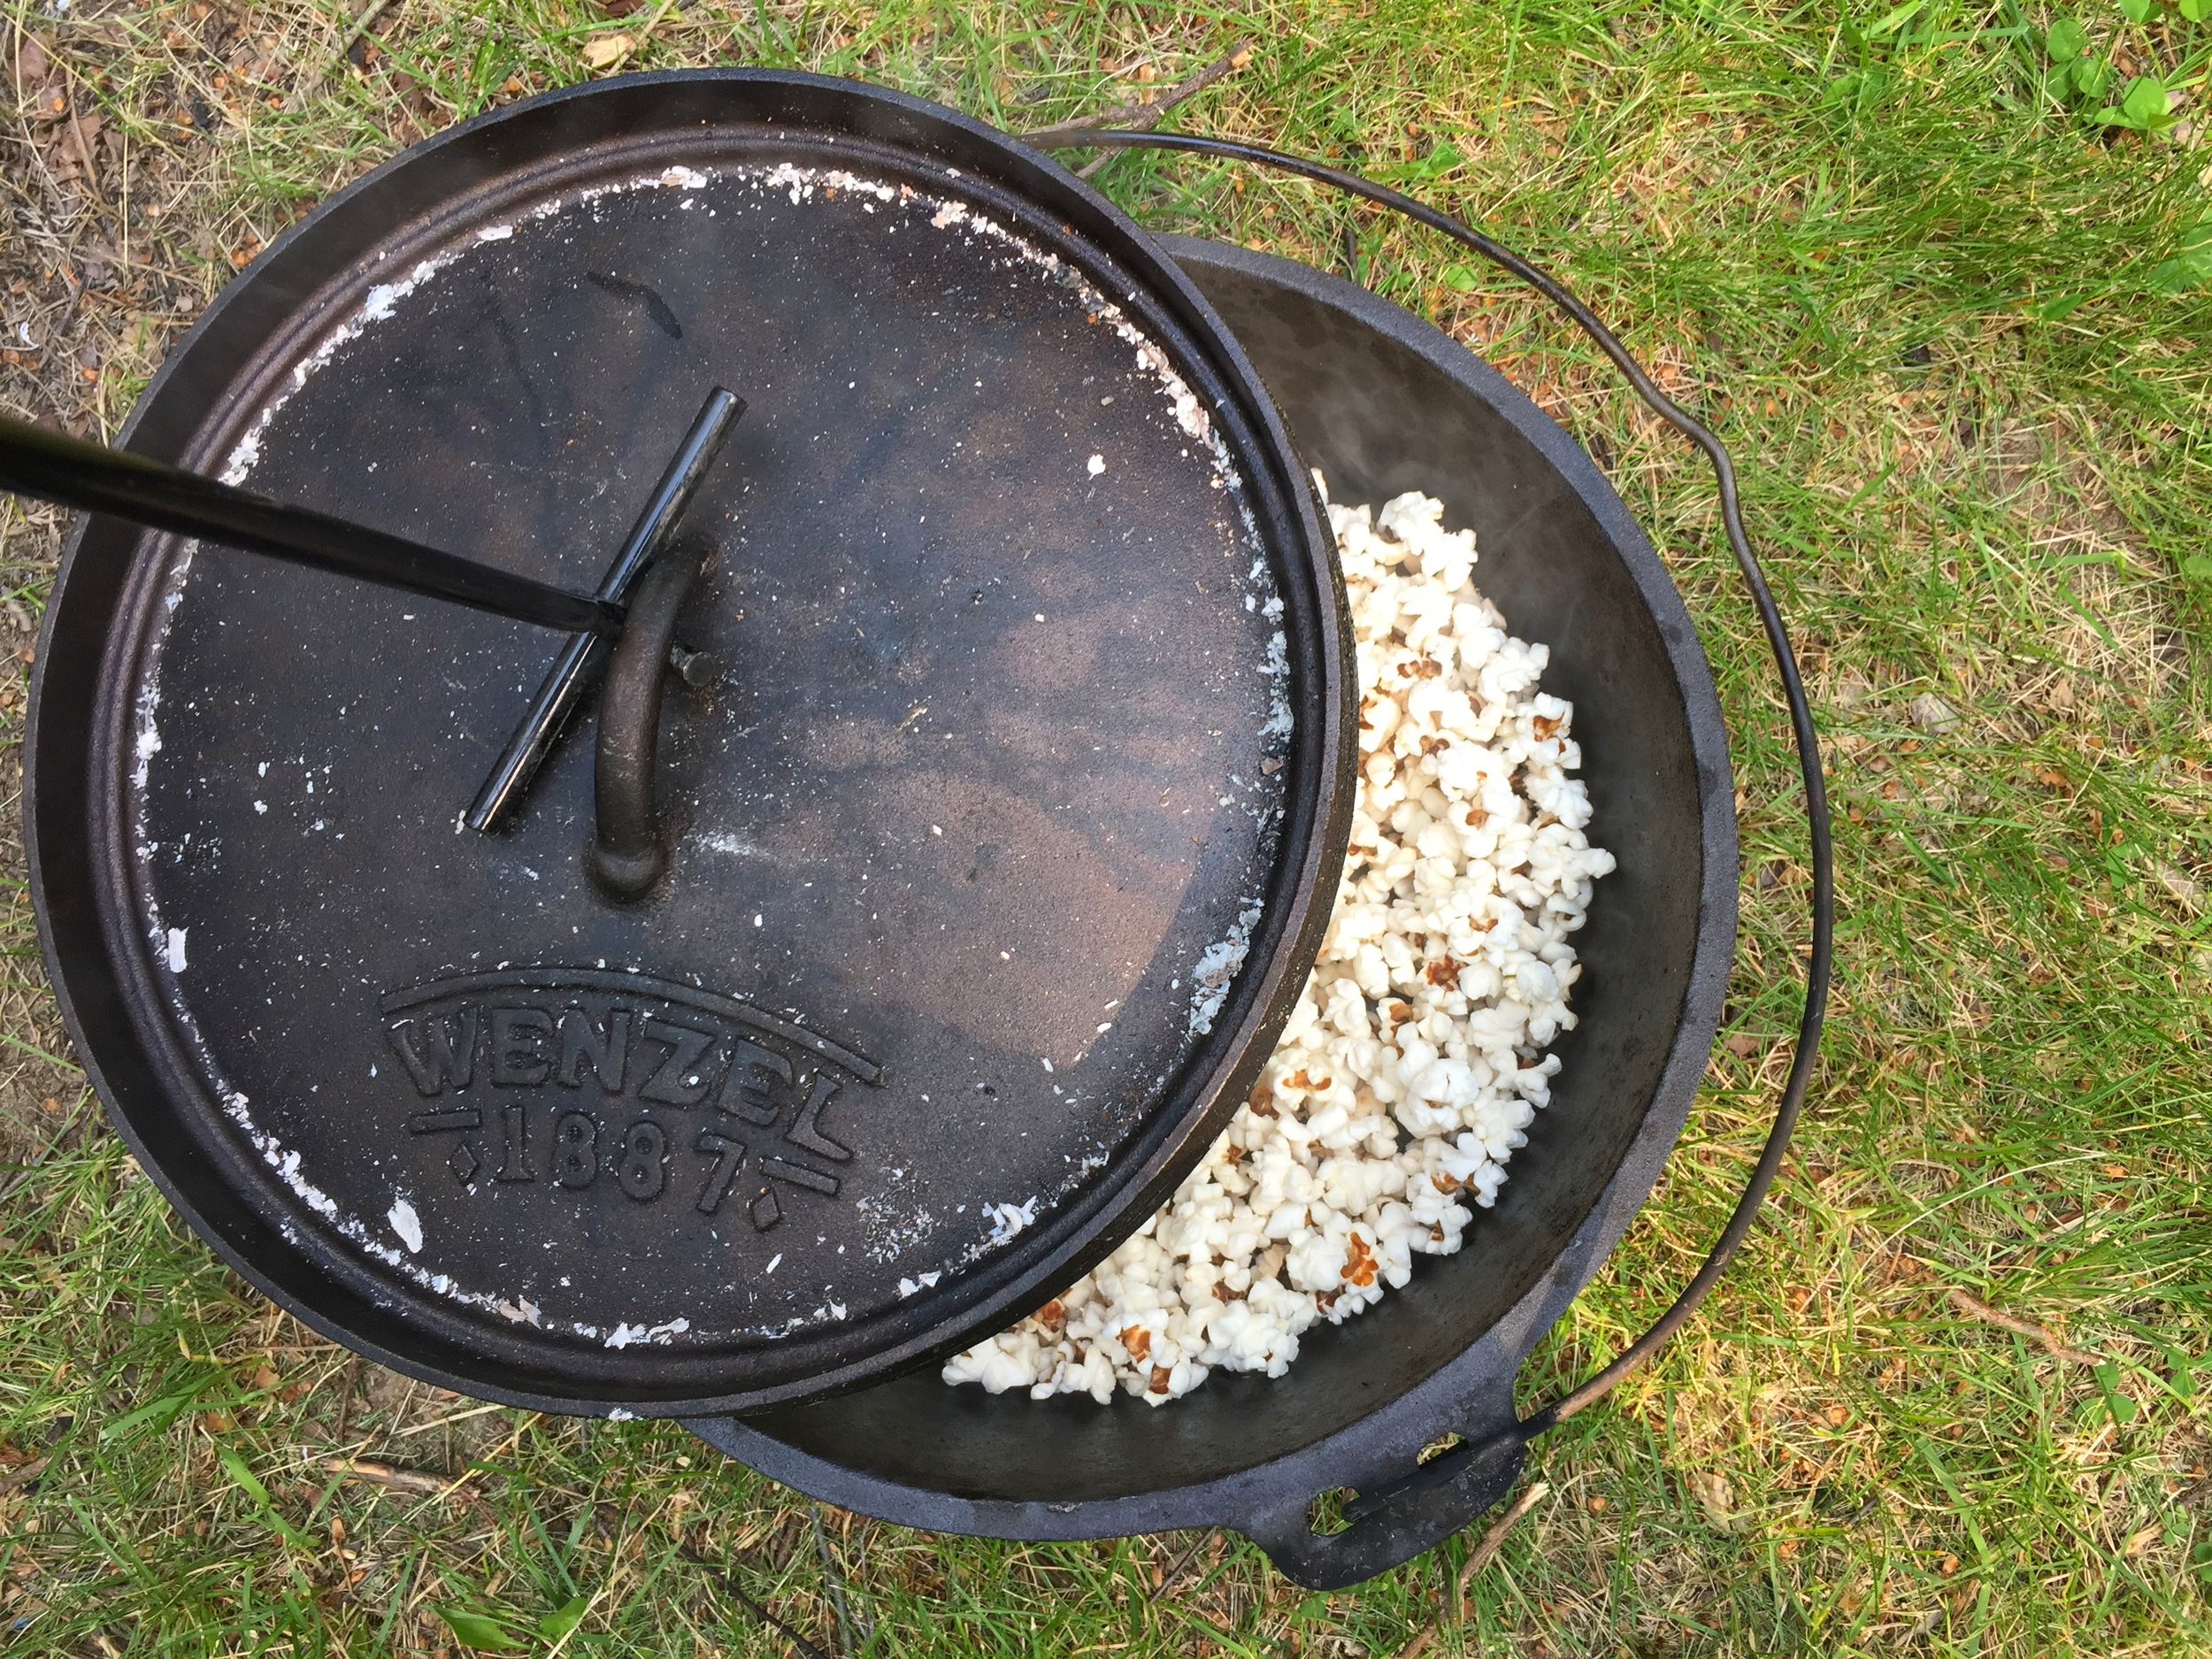 Firepit Friday Popcorn, How To Make Popcorn Over A Fire Pit